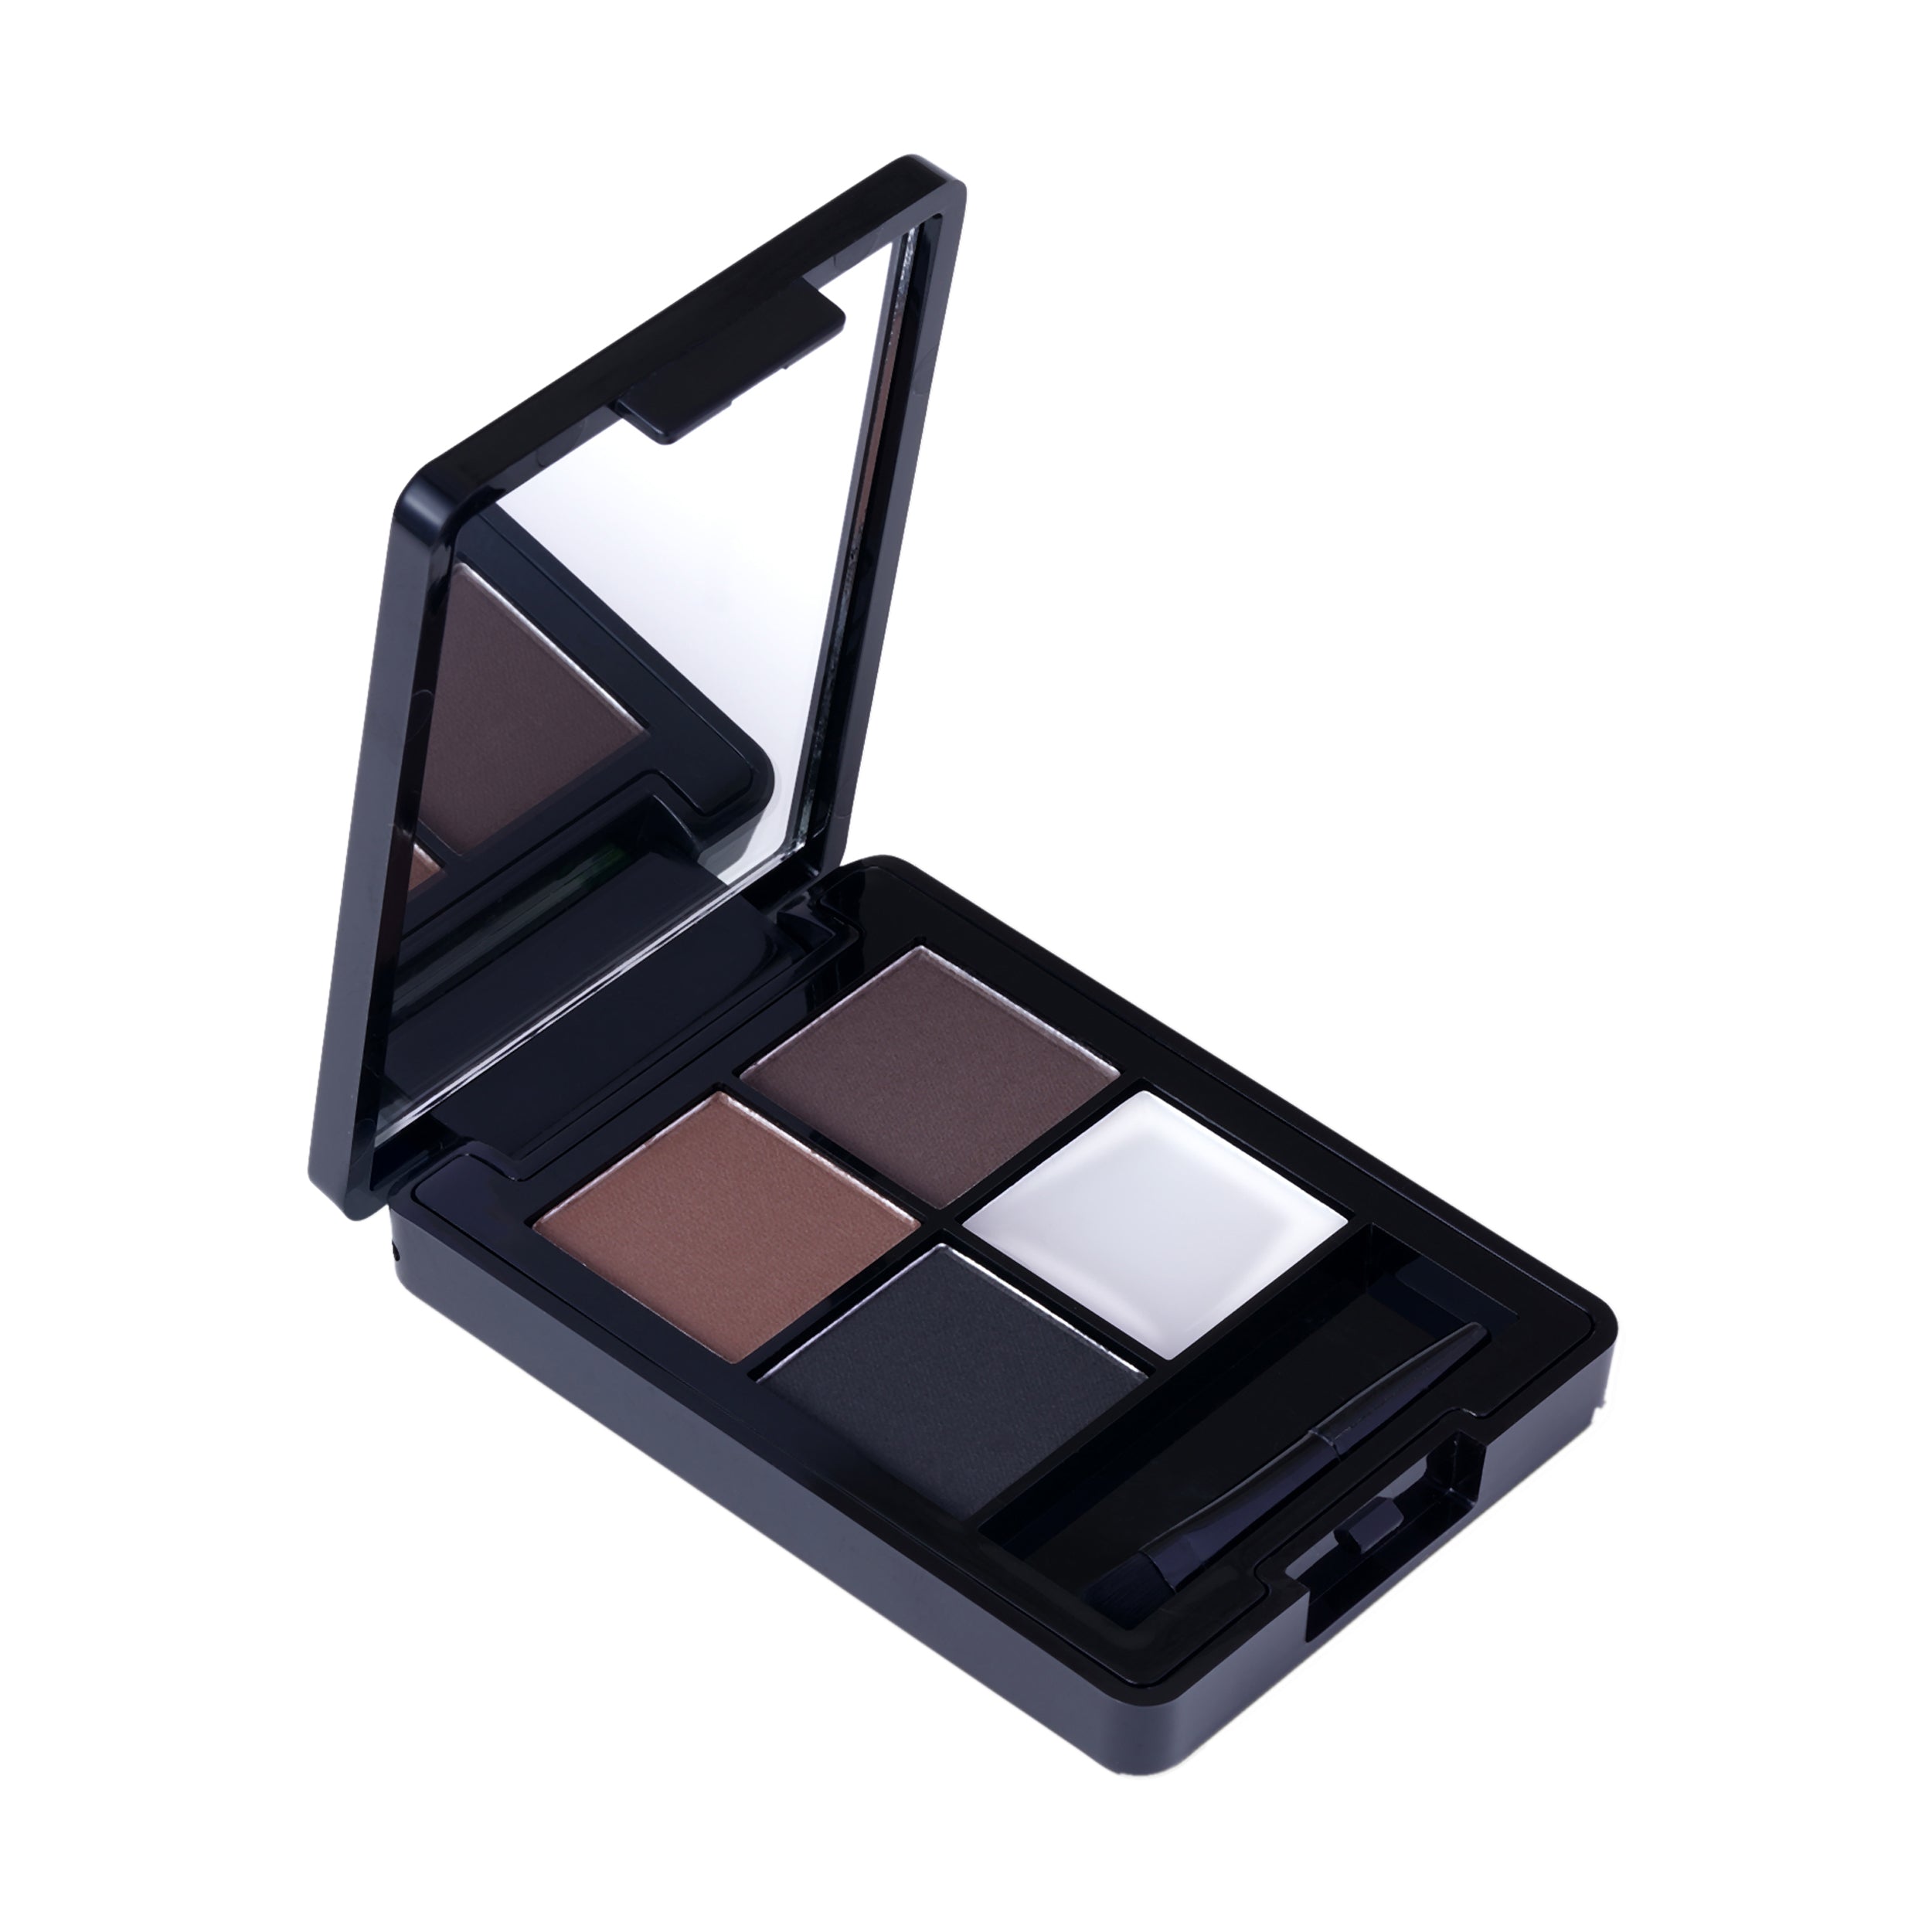 Glam21 4-in-1 Eyebrow Palette Micro Pigments, Smudge Proof, Longlasting Eye Make-up Kit 9 g (SEDUCTIVE)